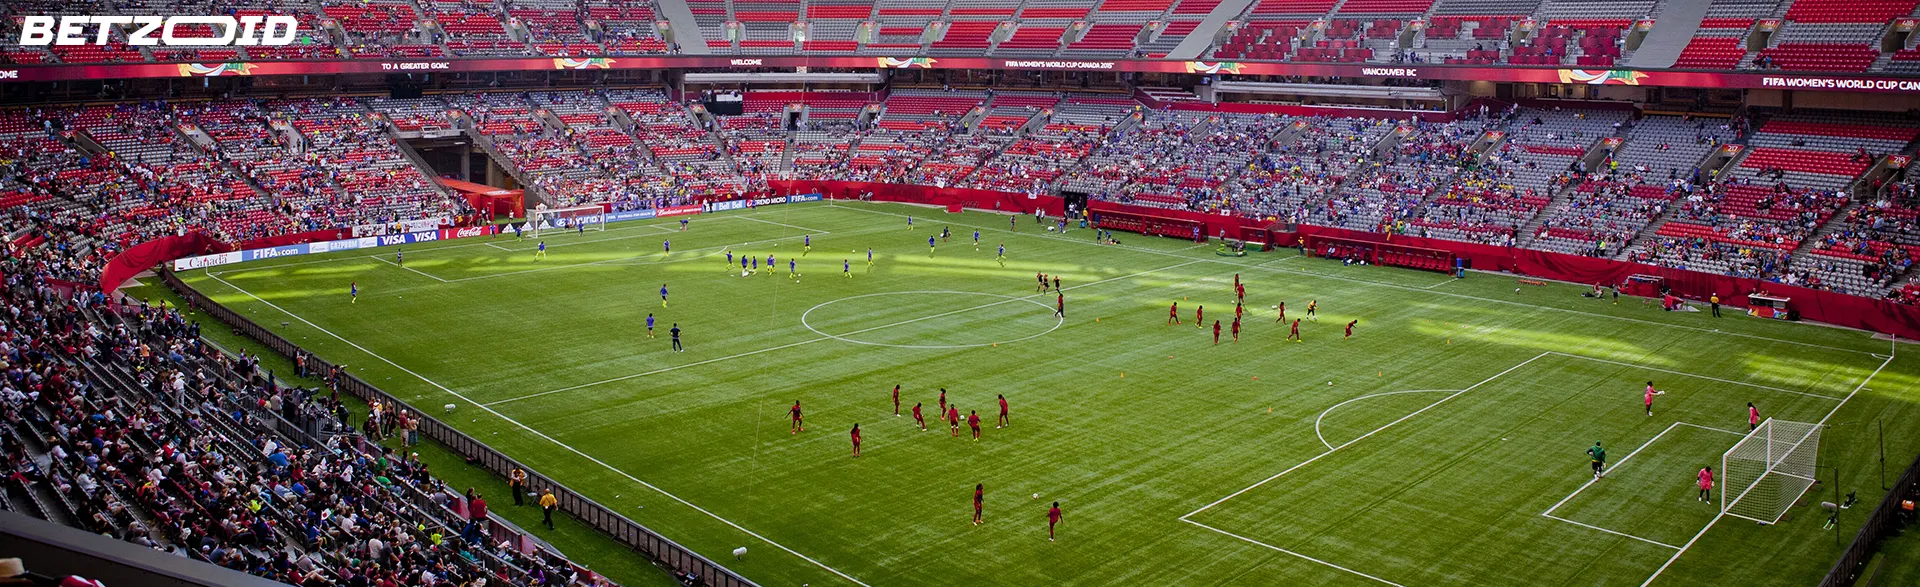 A vibrant soccer stadium filled with spectators, representing Northwest Territories betting sites.